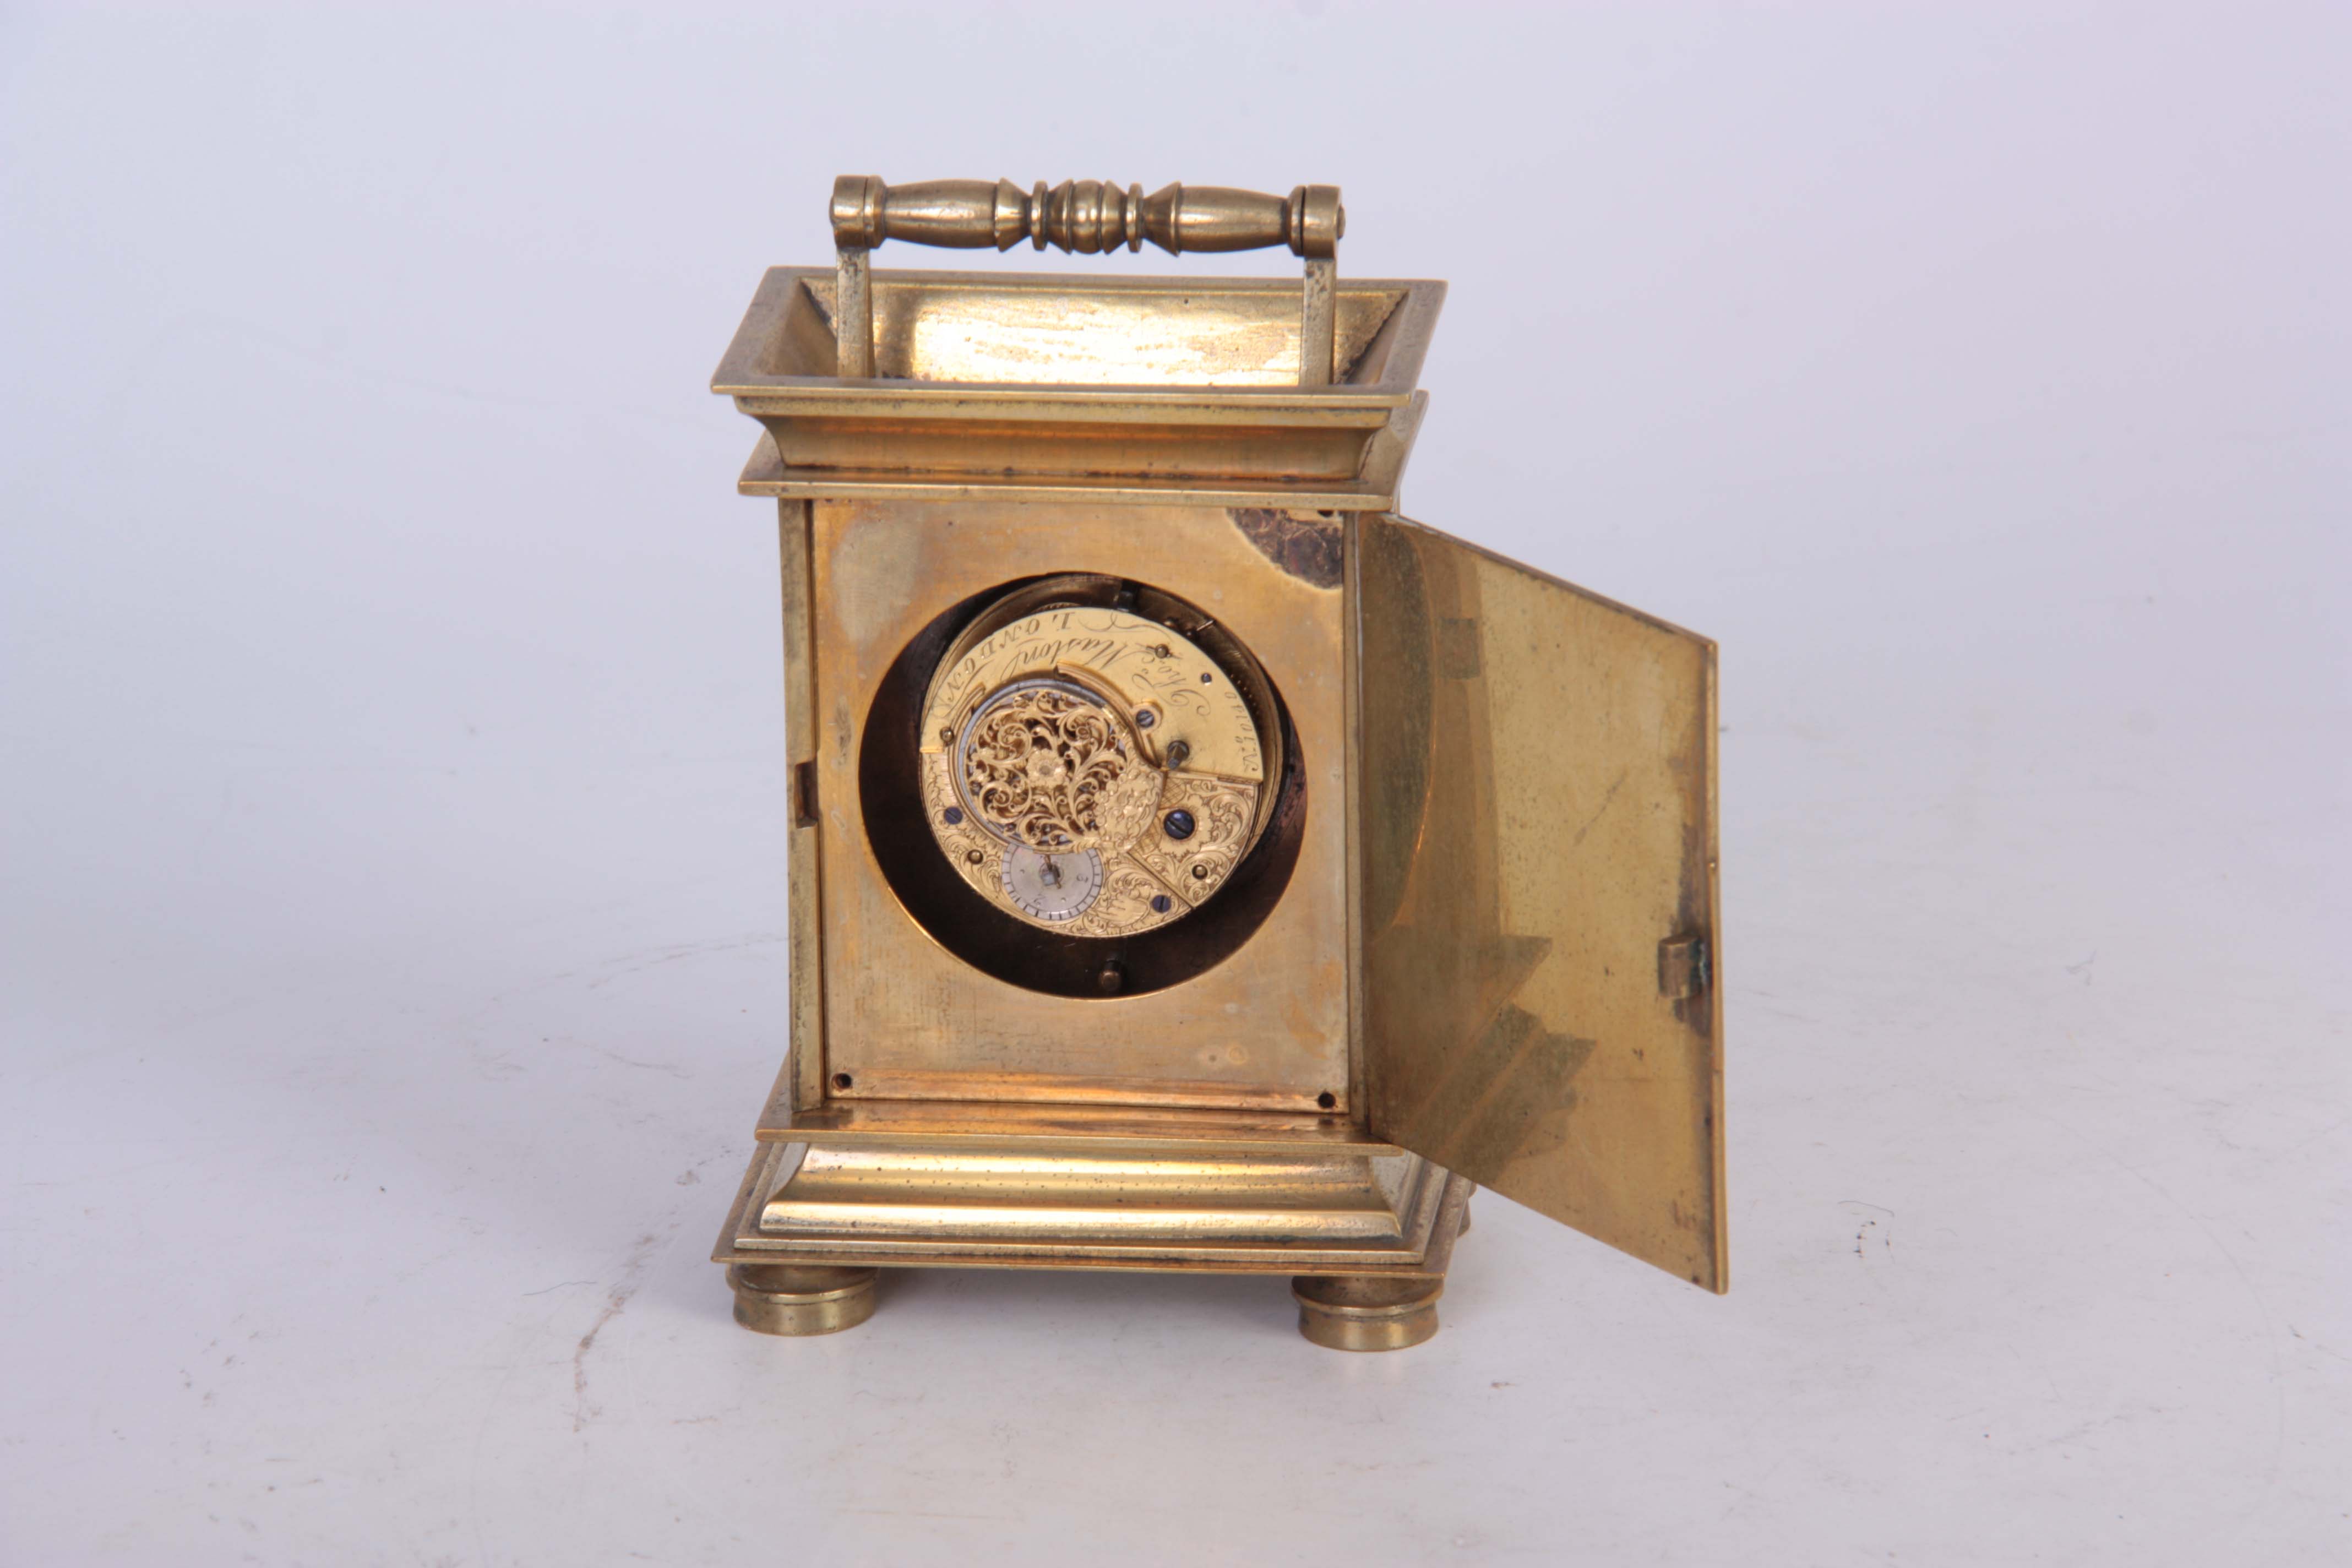 THOMAS MASTON, LONDON AN EARLY 19TH CENTURY ENGLISH CARRIAGE CLOCK having a brass moulded case - Image 3 of 4